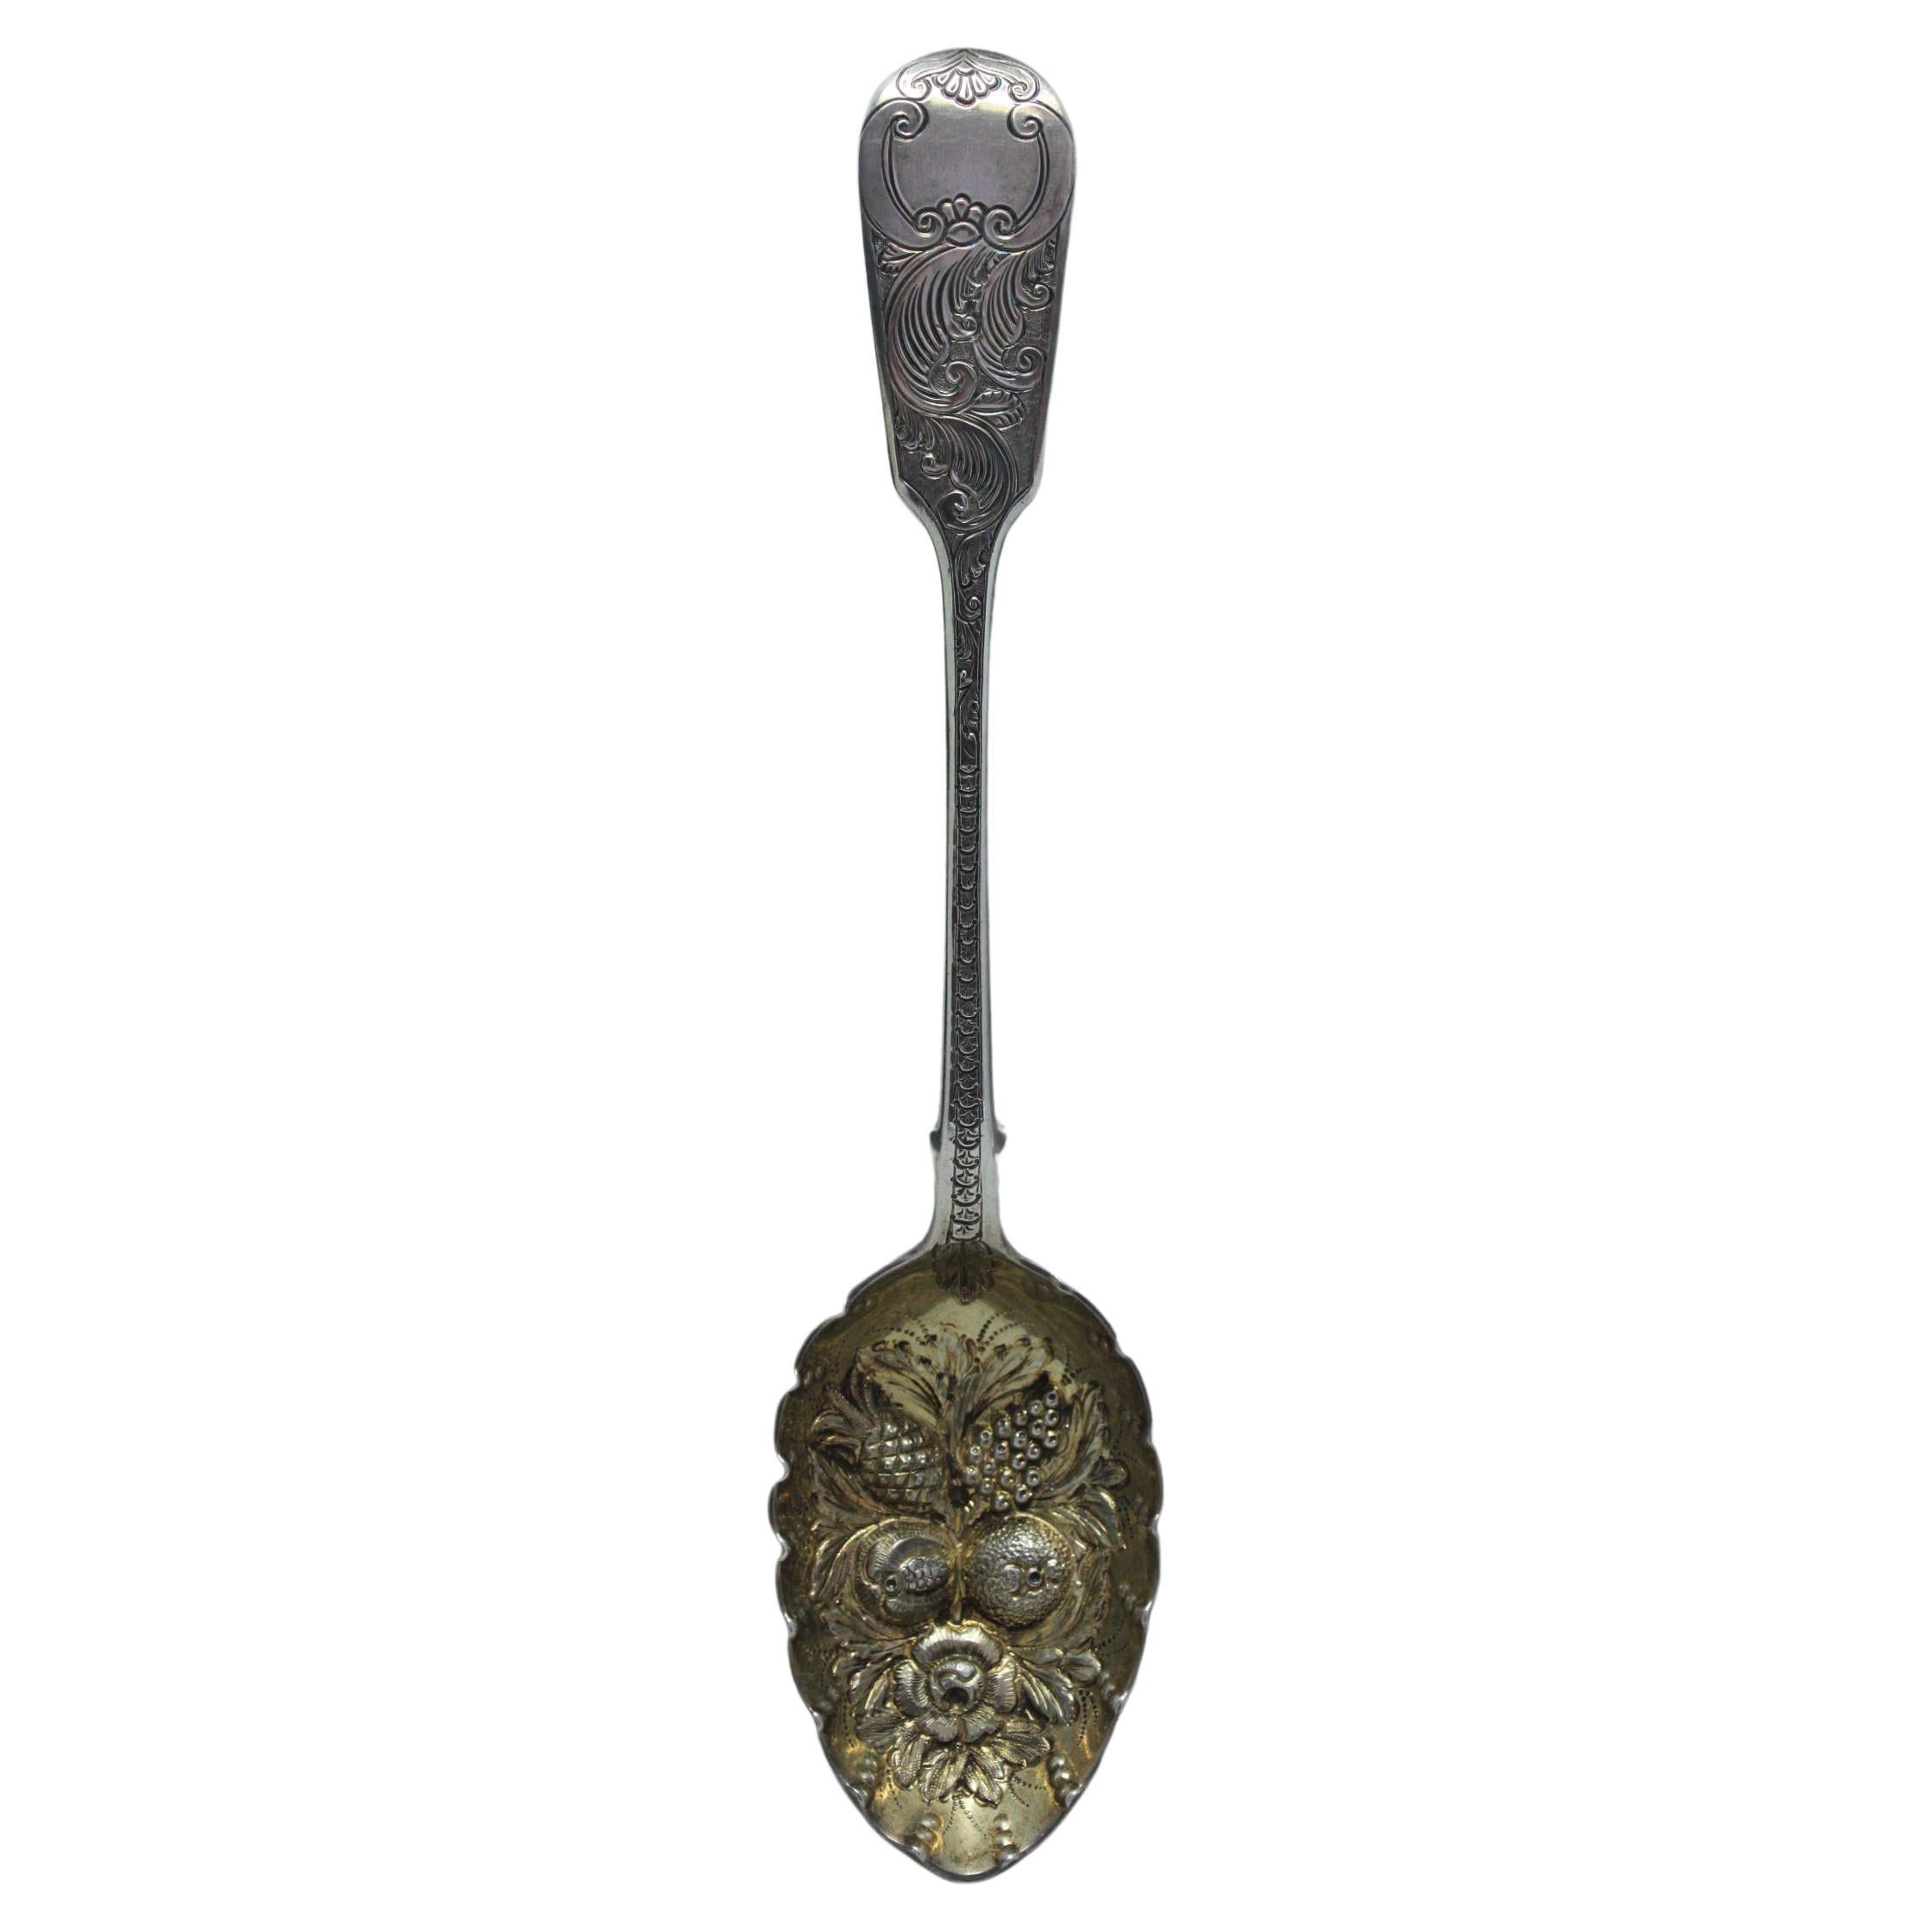 Silver Gilt Berry Spoon by James and Josiah Williams Exeter 1861